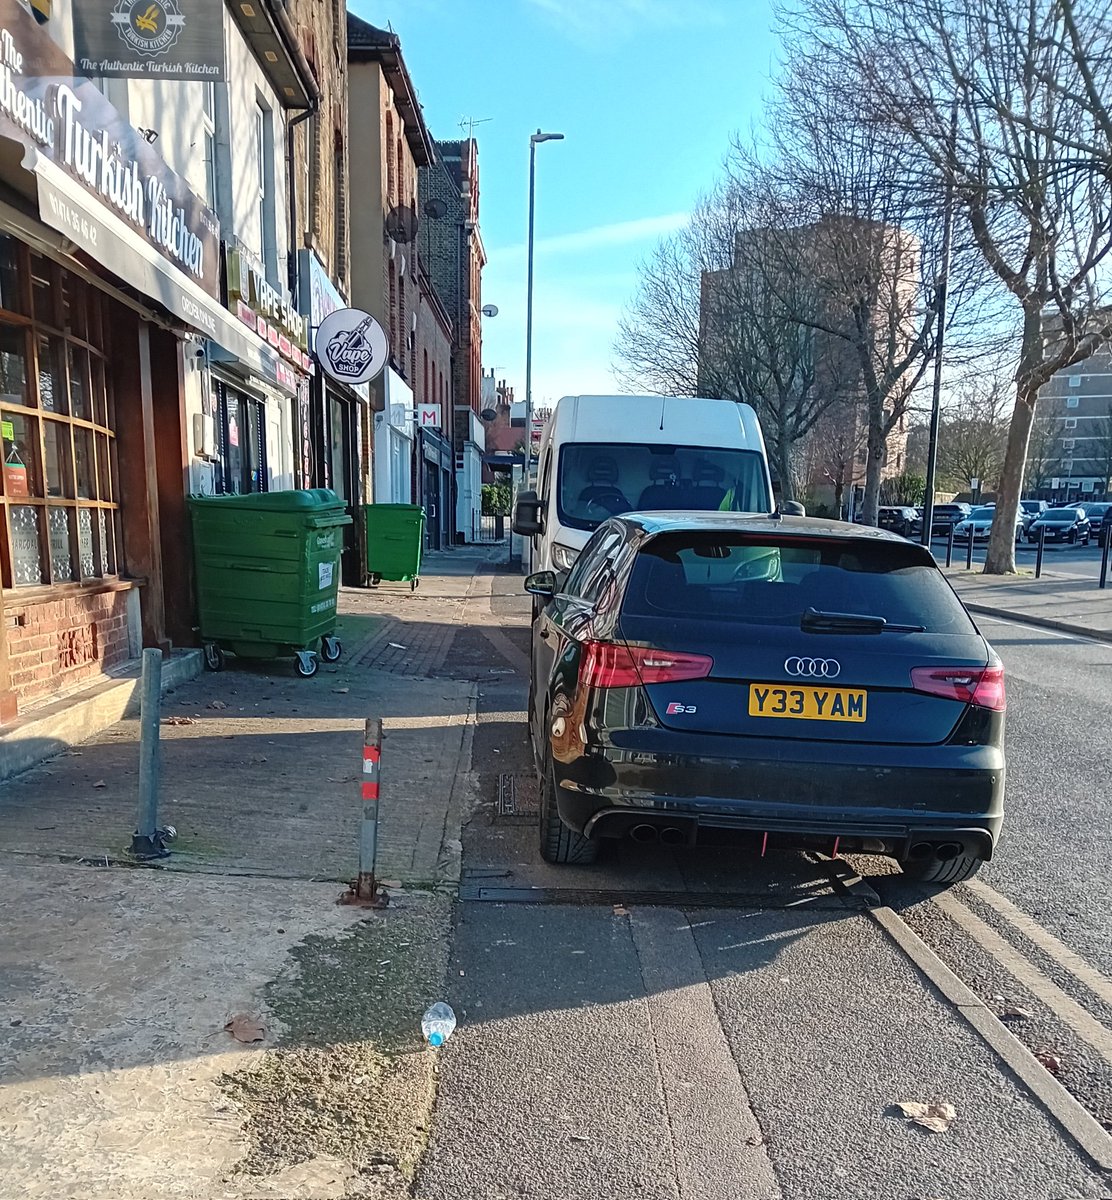 @YPLAC @parkingknobs @BlatantWatch 
Parrock Street #Gravesend They couldn't give a sh*t  #pavementparking #AccessibleStreets #PavementsForPeople #BadParking #pavementsareforpeople @graveshambc @kent_police @KentPoliceGrav